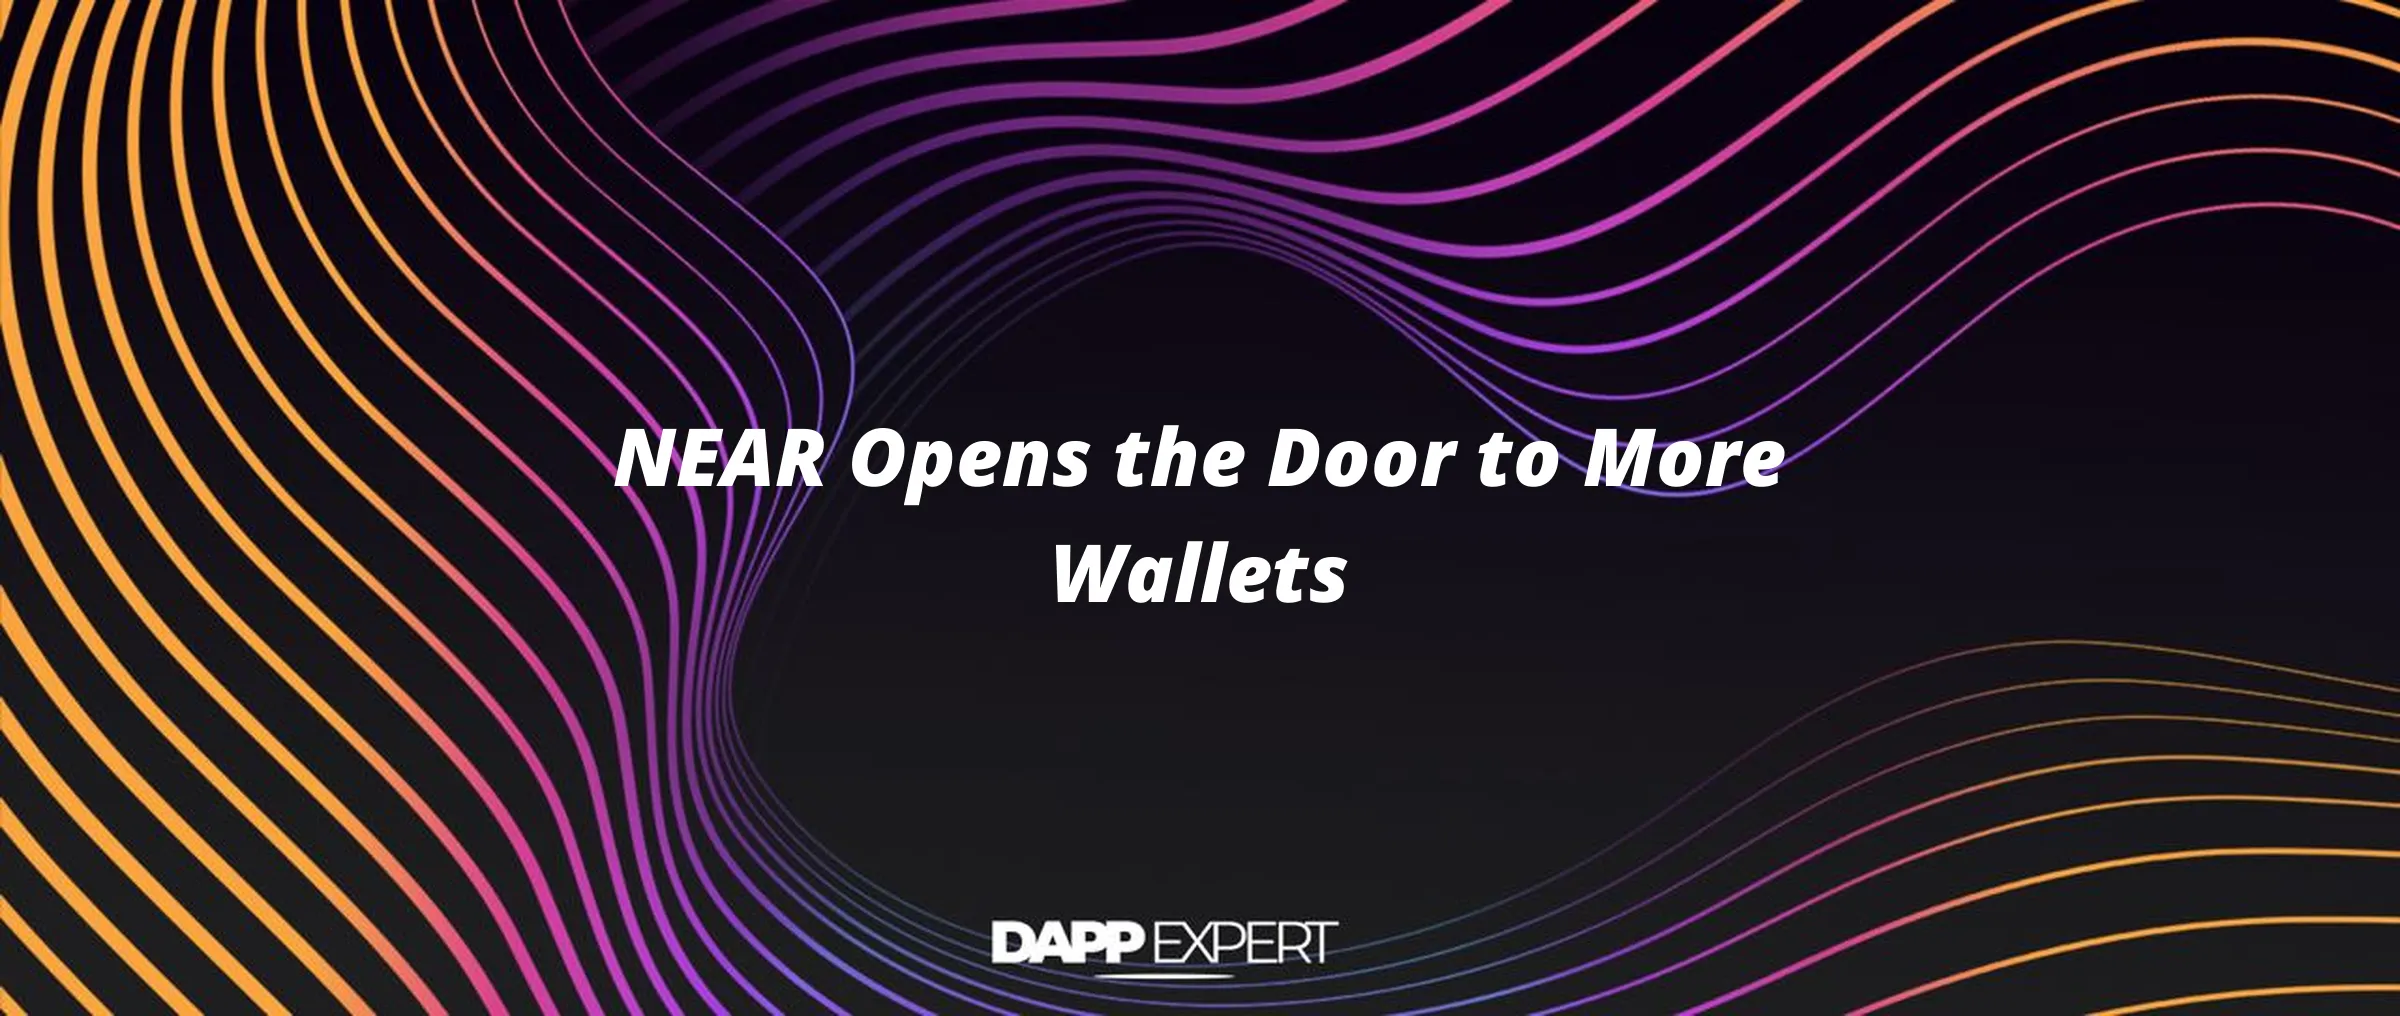 NEAR Opens the Door to More Wallets